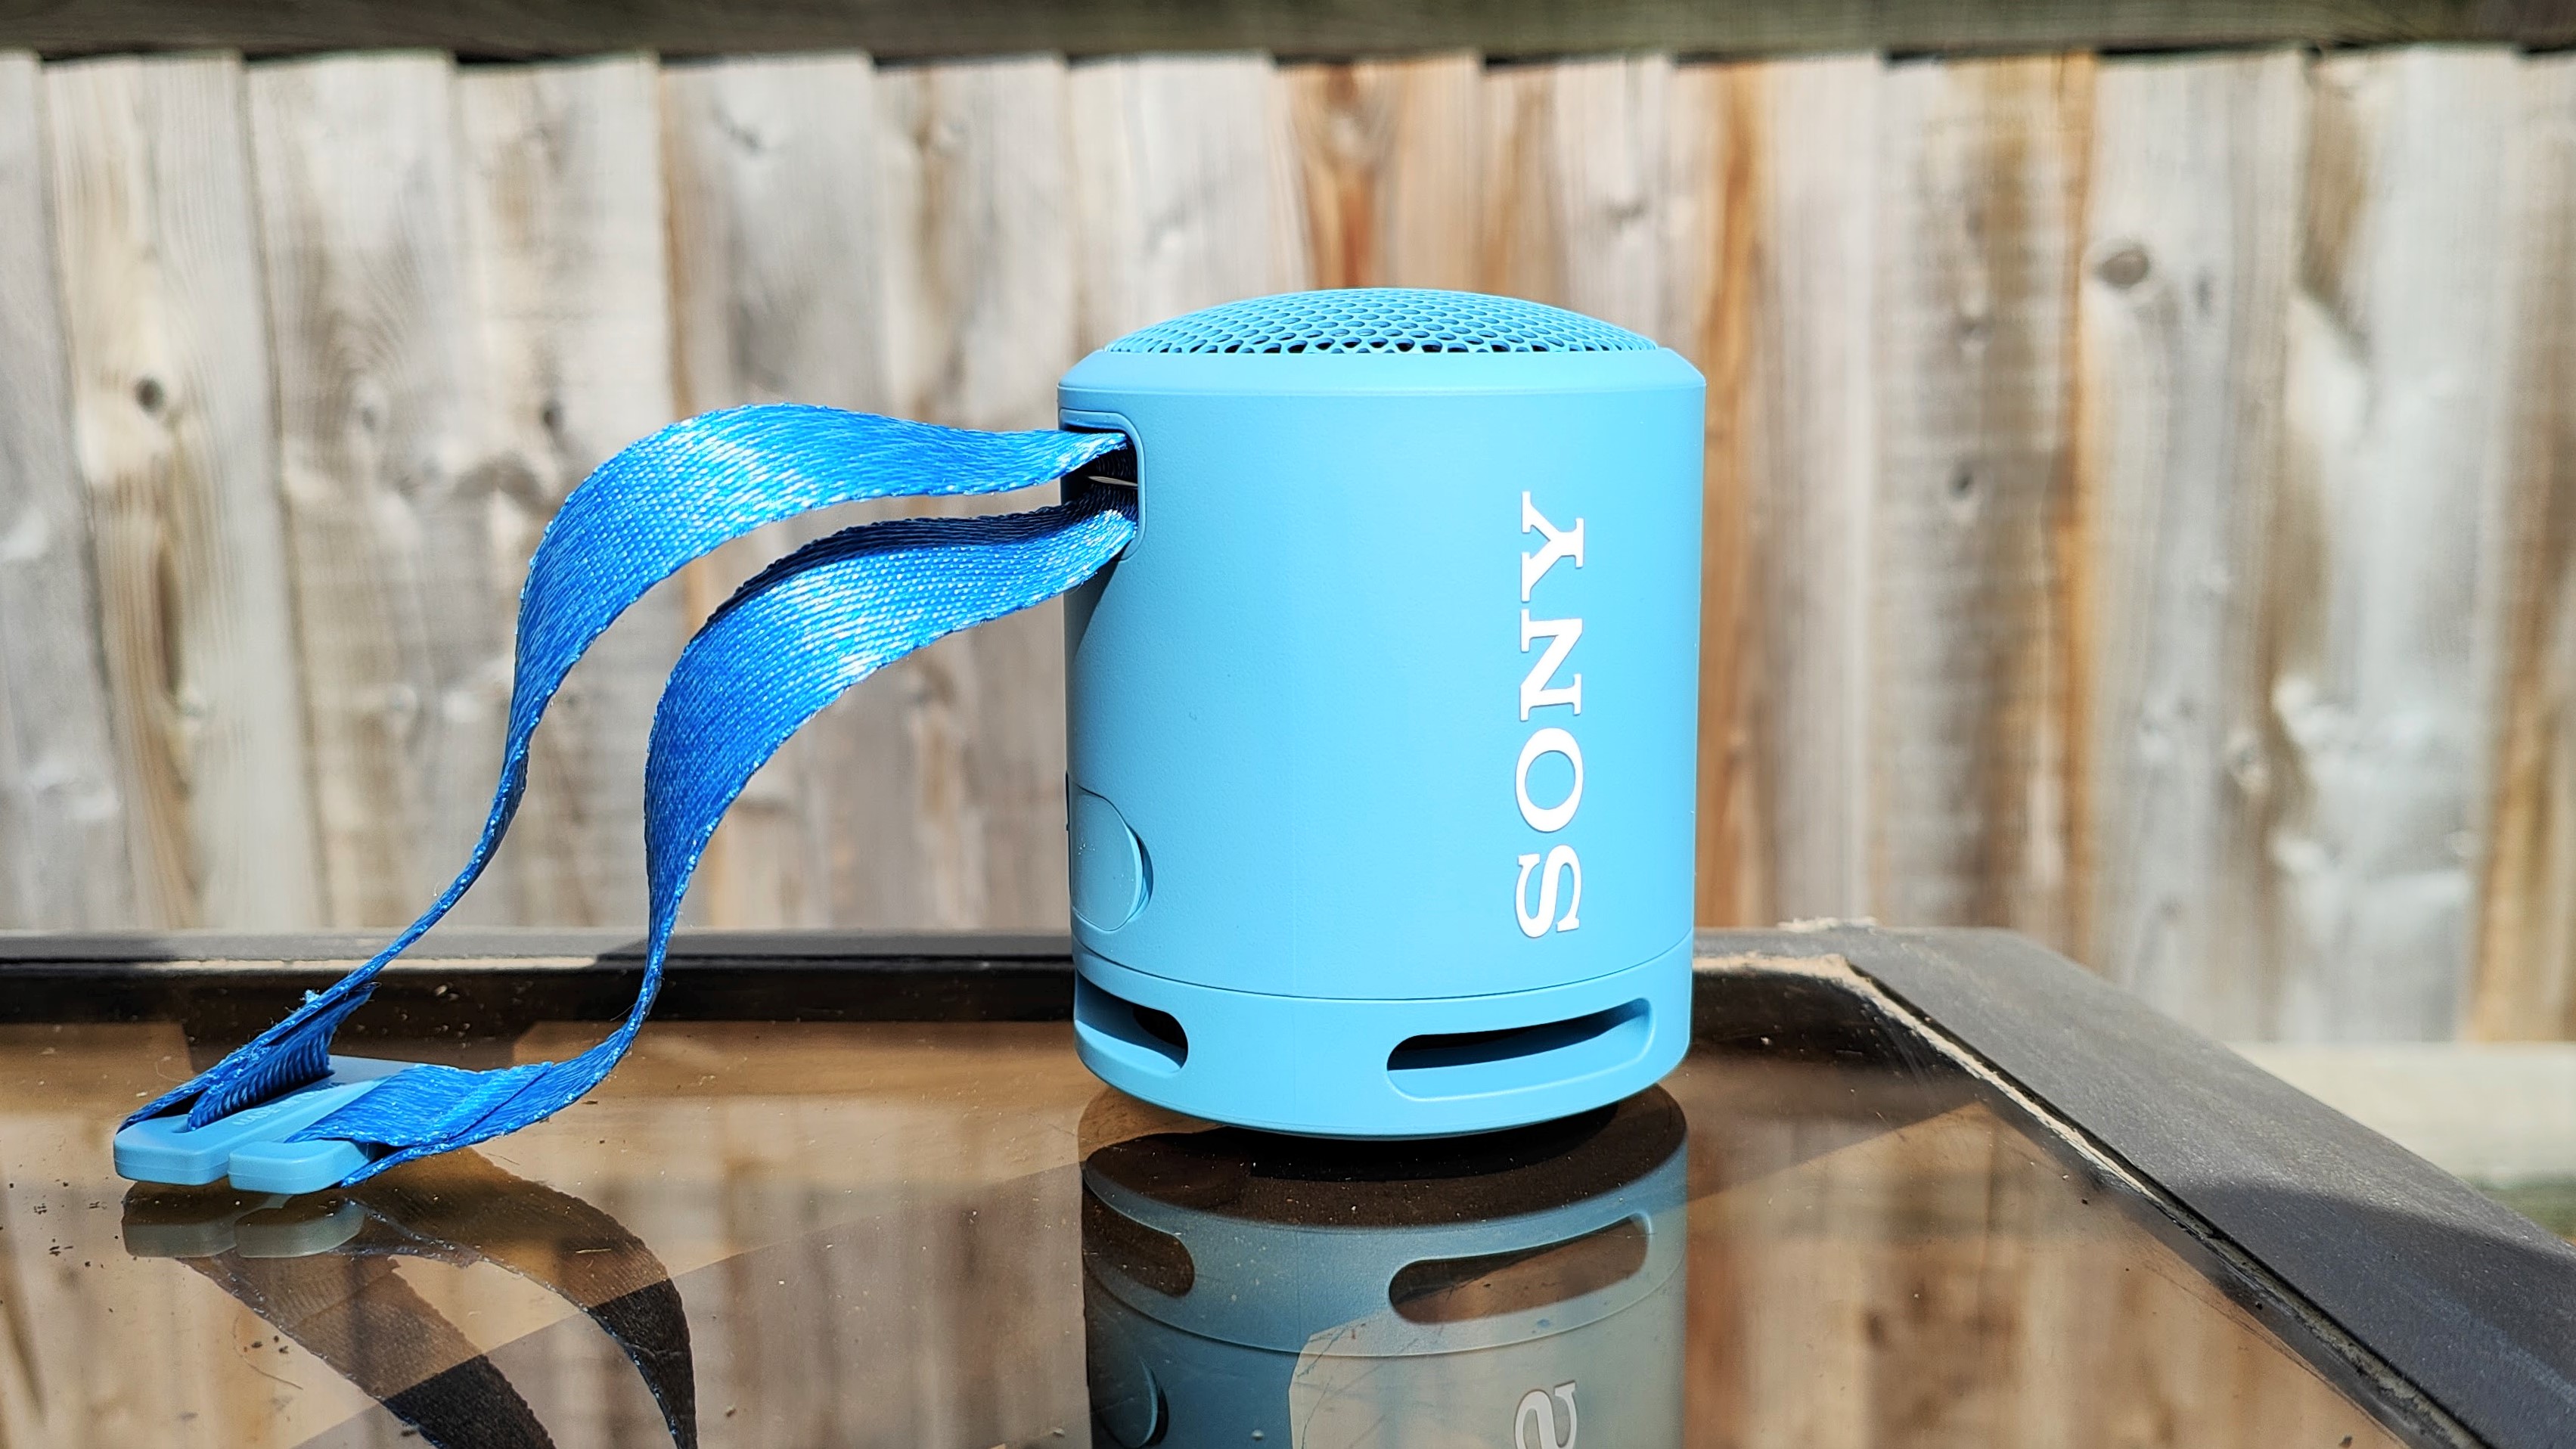 Sony SRS-XB13 review: a budget Bluetooth speaker to use outside | T3